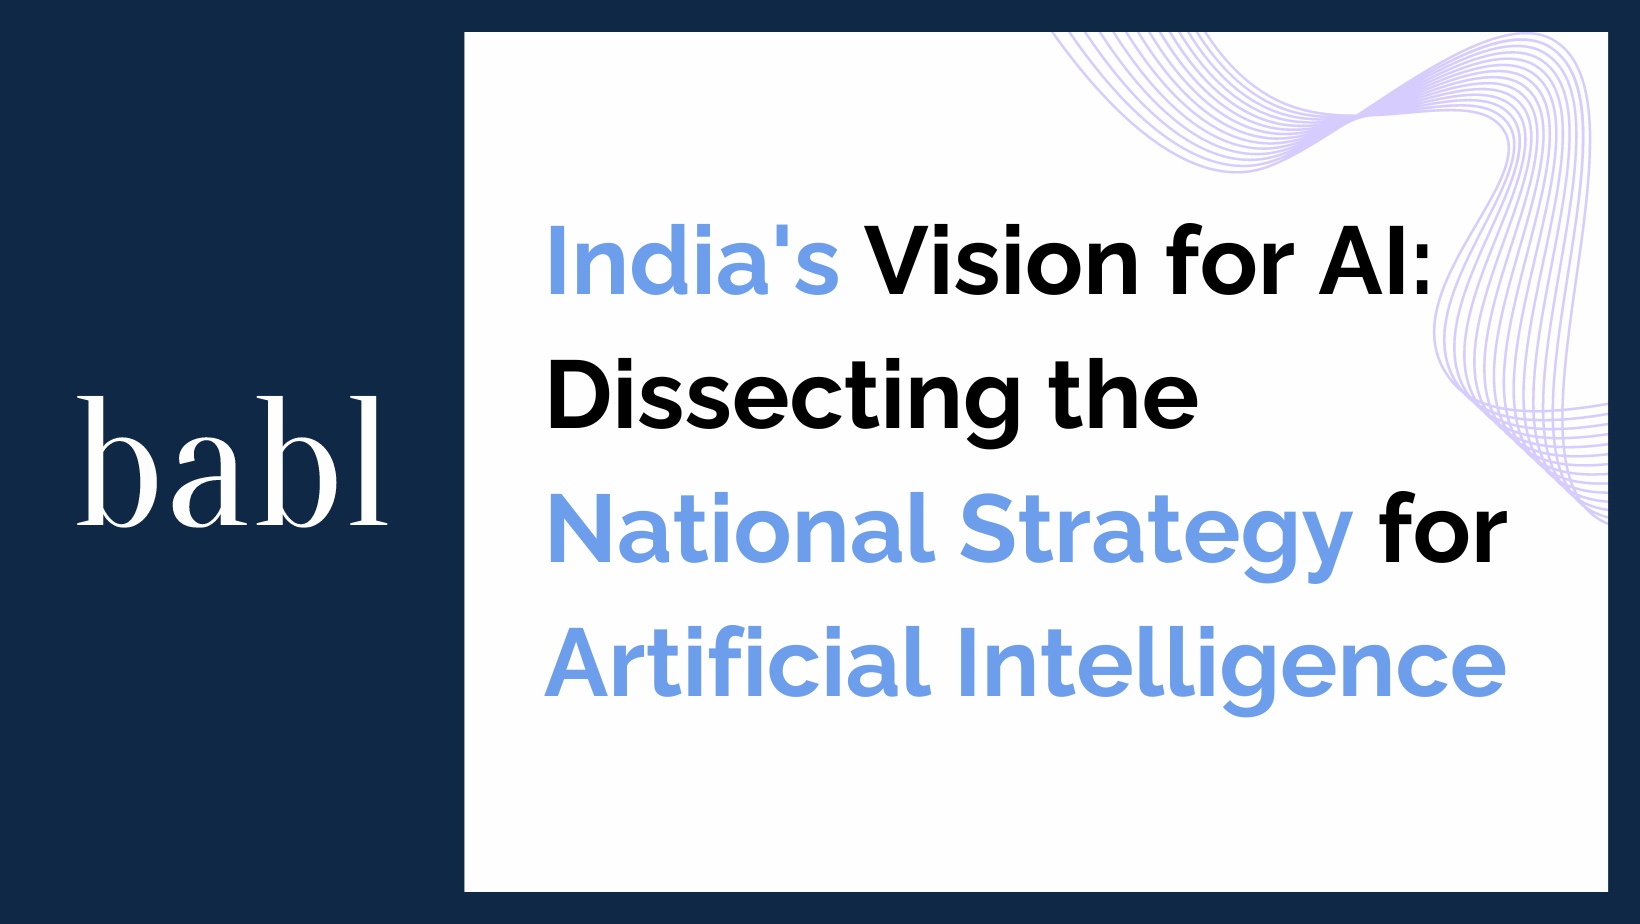 India’s Vision for AI: Dissecting the National Strategy for Artificial Intelligence